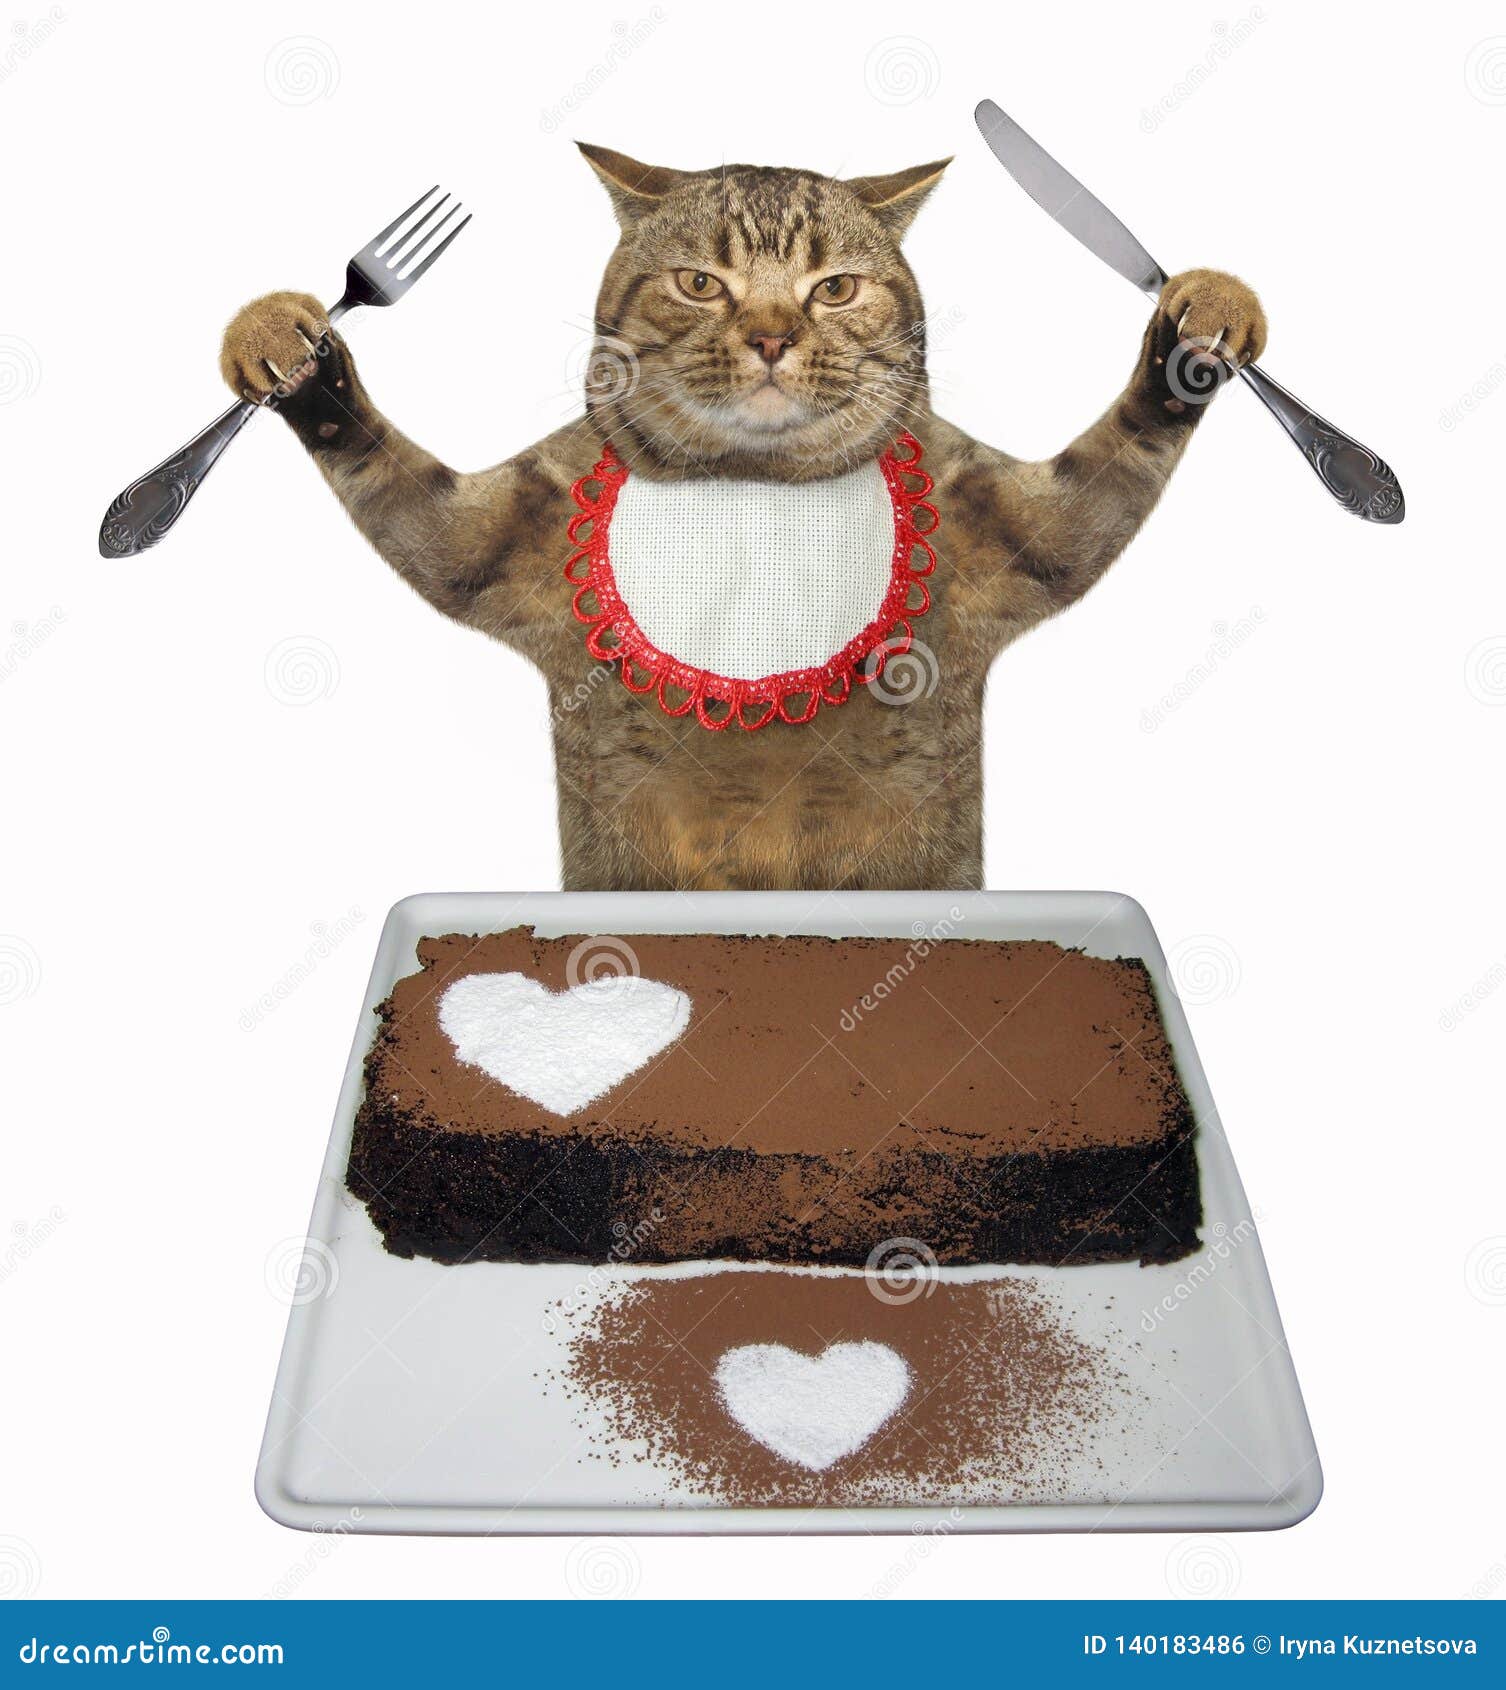 Cat Eating A Chocolate Cake Stock Photo Image of brownie, creative